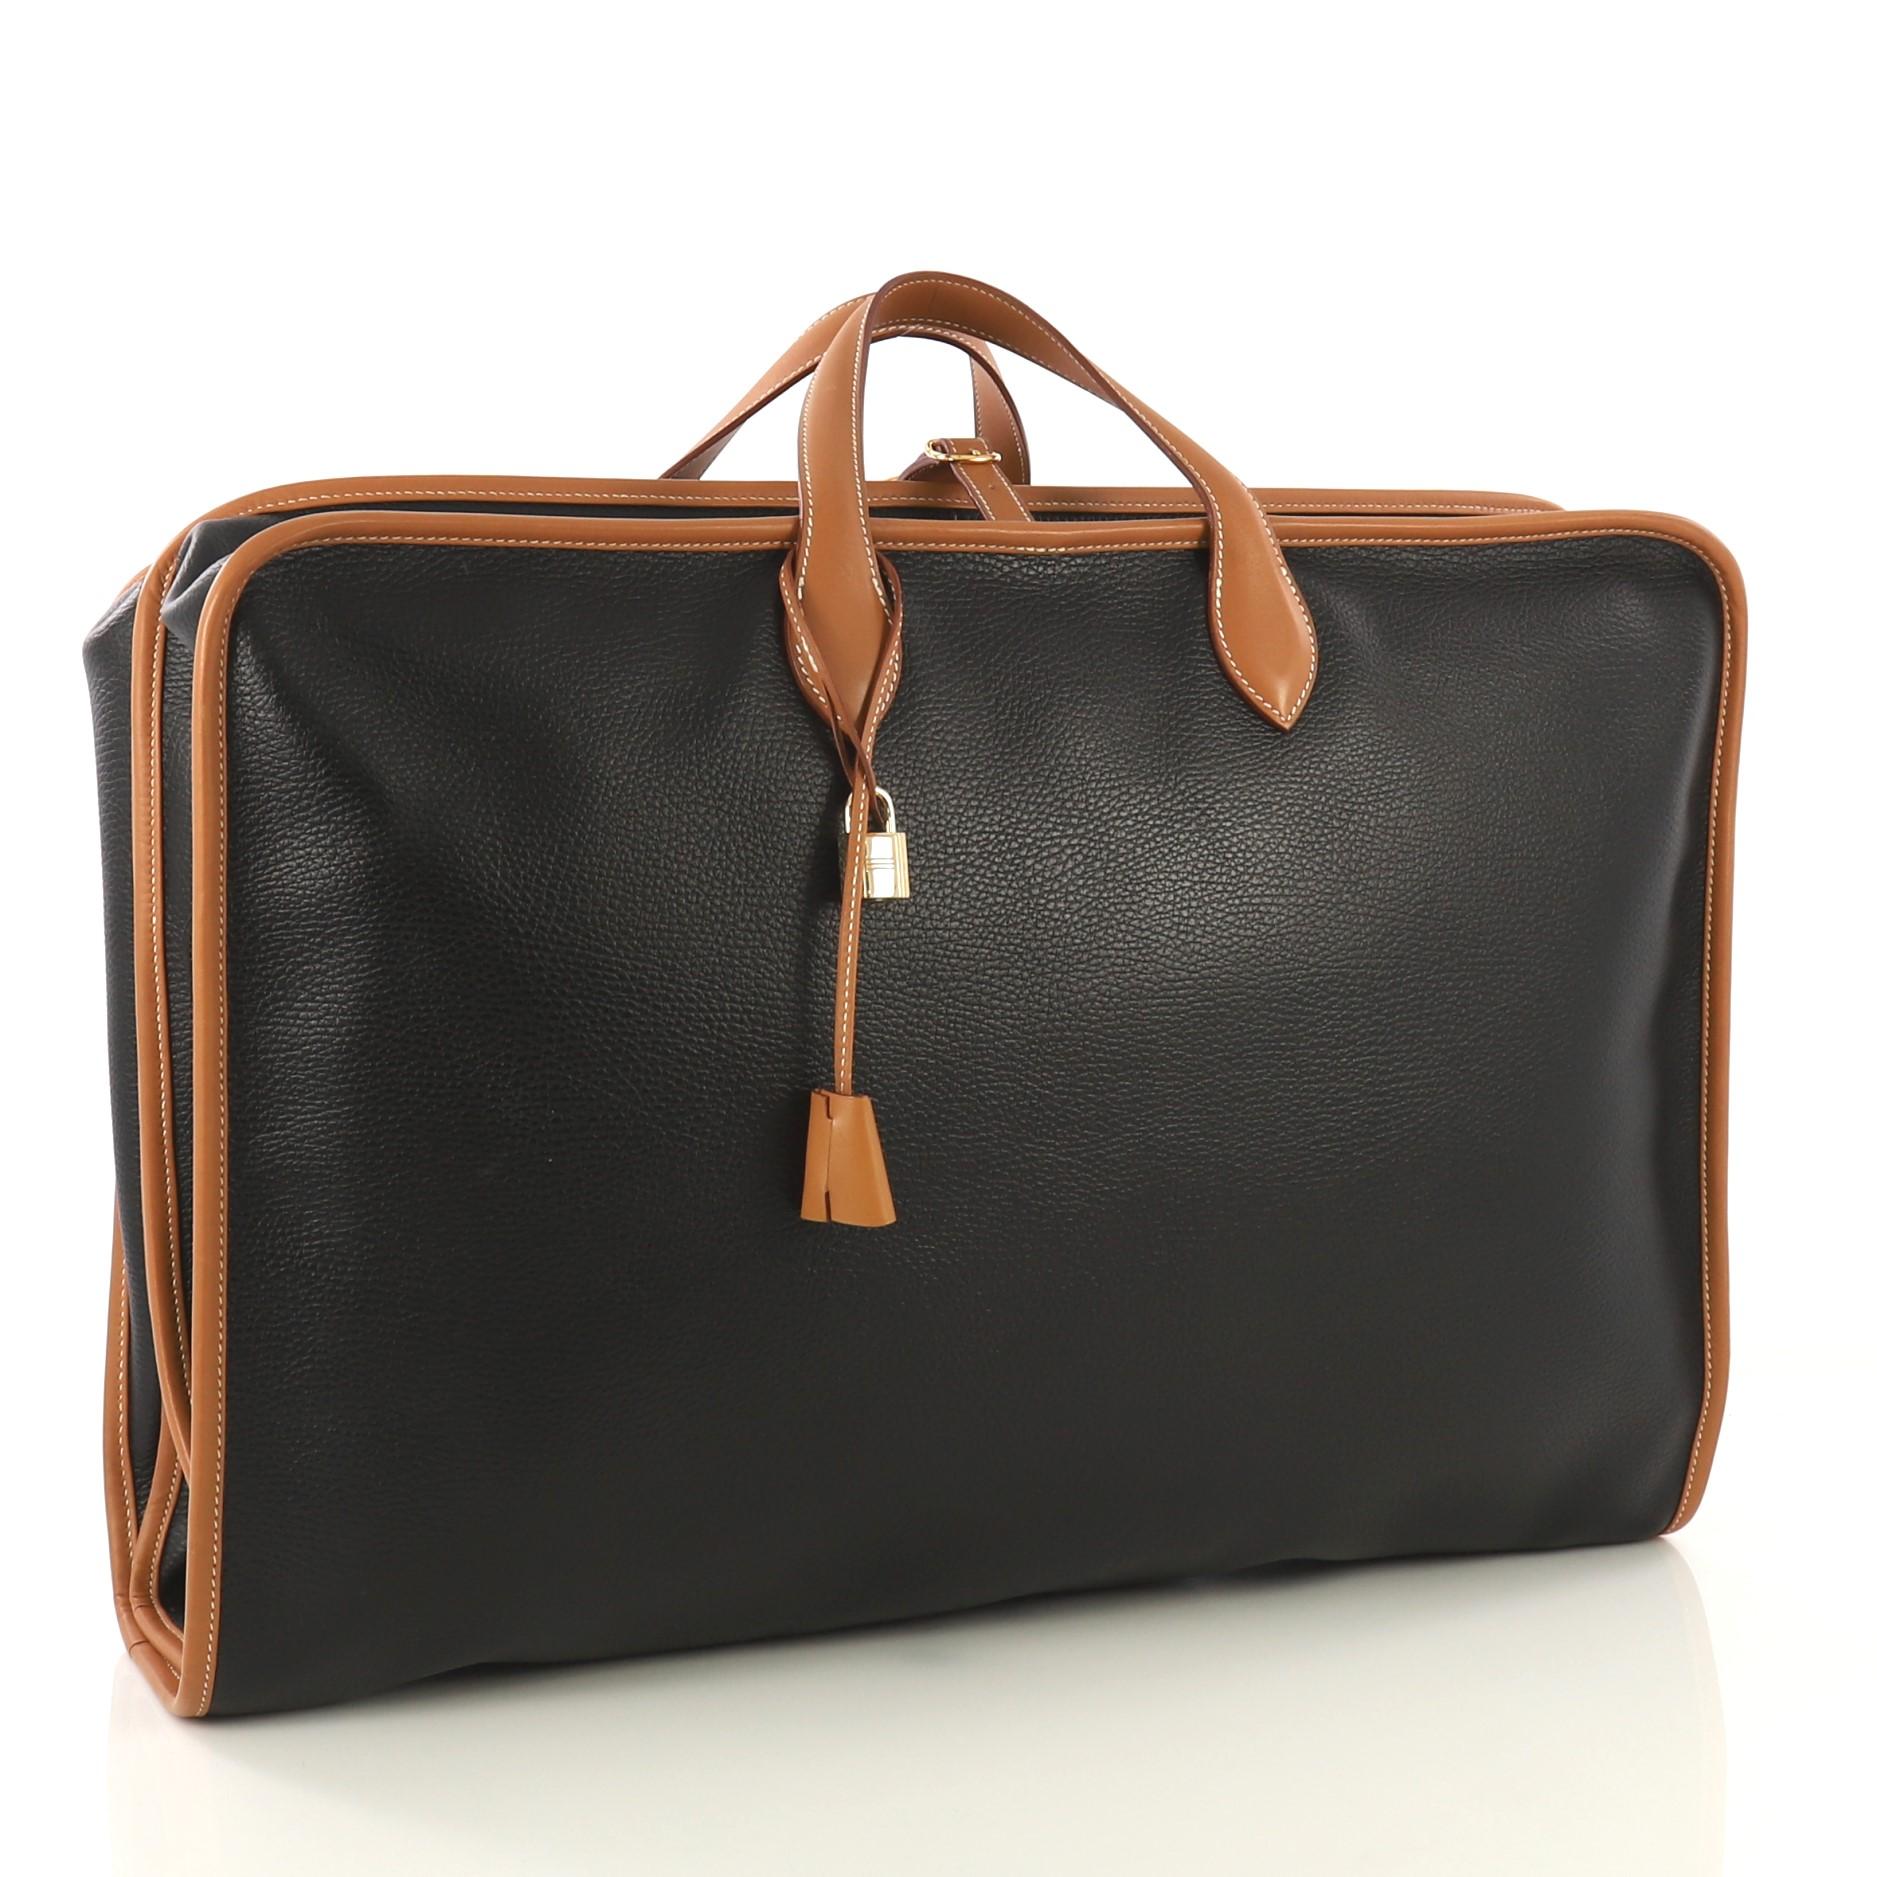 This Hermes Victoria Suter Garment Bag Leather, crafted from Noir black Ardennes and Natural brown Chamonix leather, features dual flat handles and gold hardware. Its zip closure opens to a beige canvas interior. Date stamp reads: A (Square) 1997.